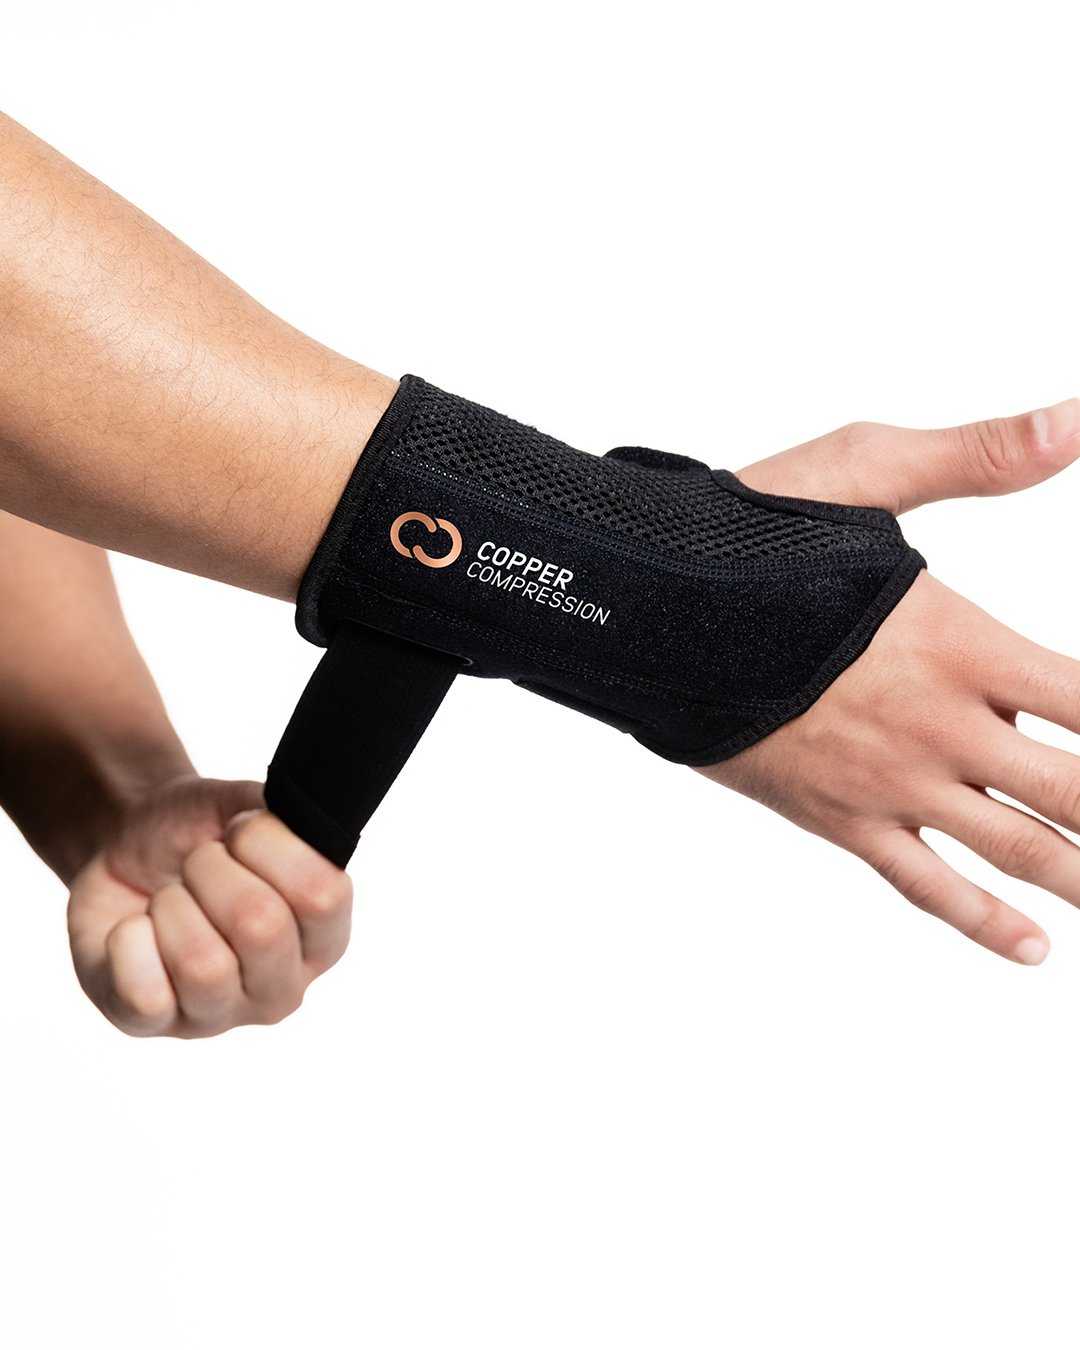 INDEEMAX Copper Wrist Compression Sleeve 1 Pair, Comfortable Hand Brace  Support with Strap for Arthritis, Tendonitis, Sprains, Workout, Carpal  Tunnel